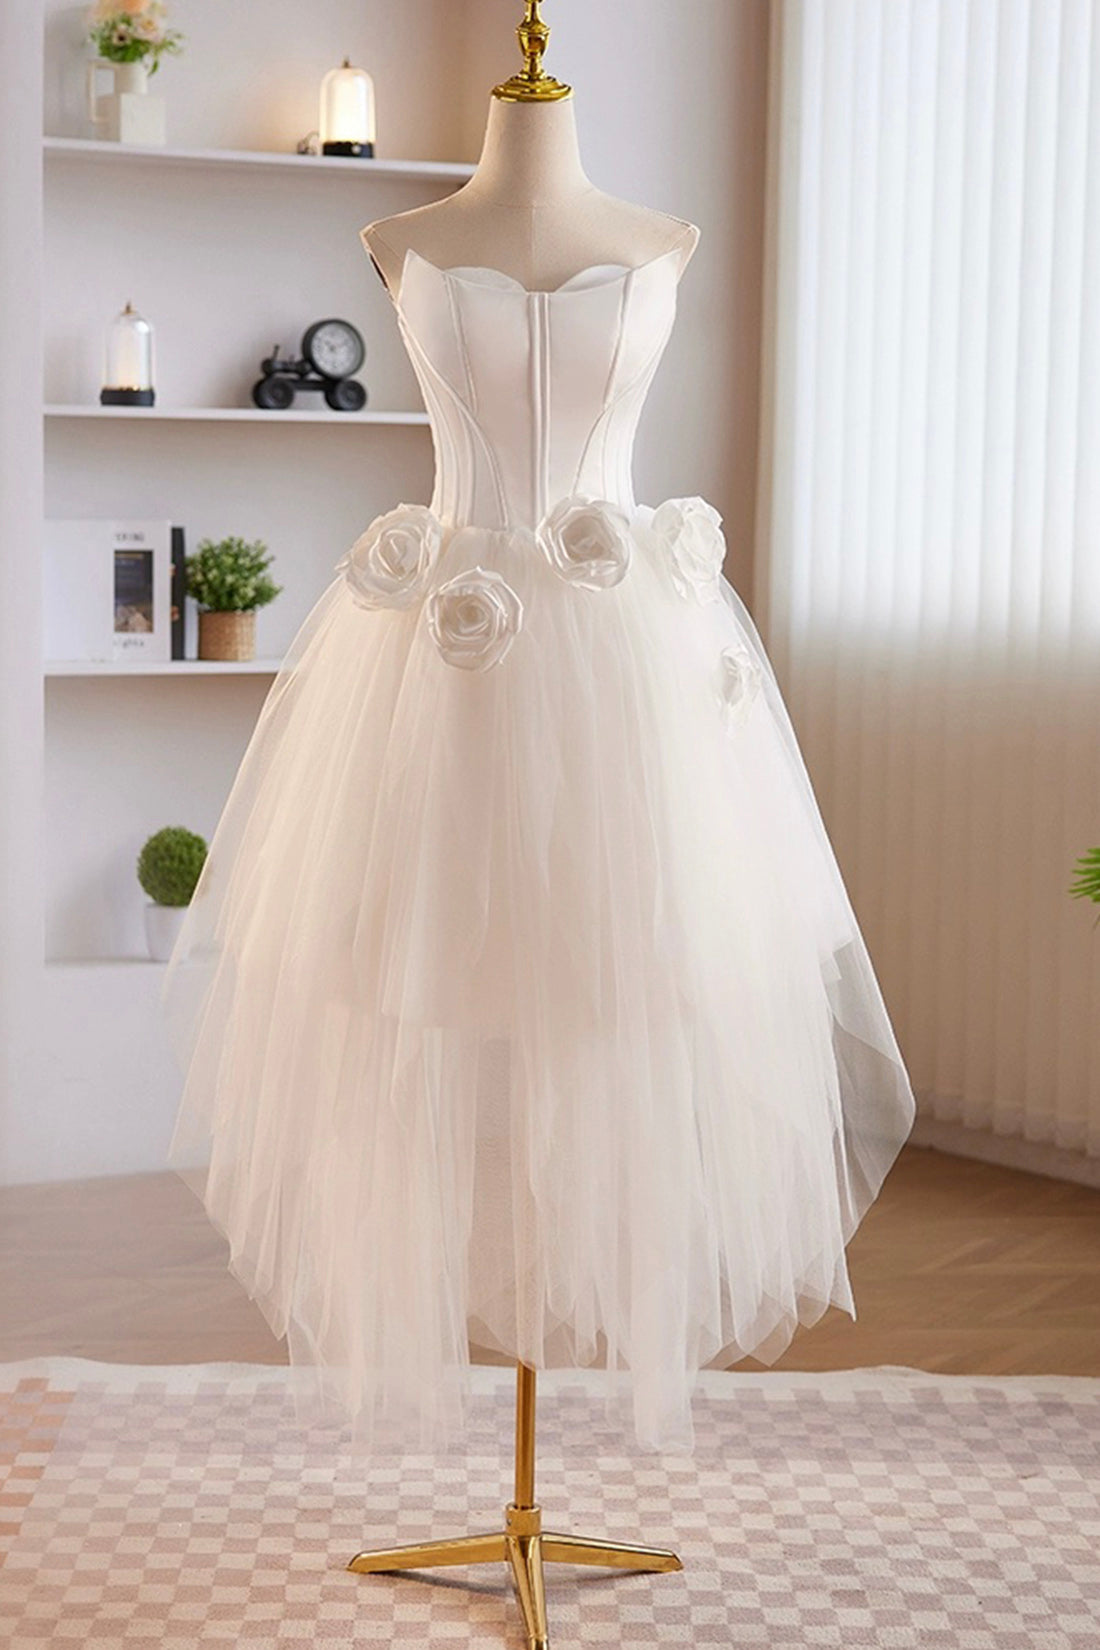 Unique White Strapless Irregular Tulle Short Prom Dress Outfits For Girls, White Party Dress